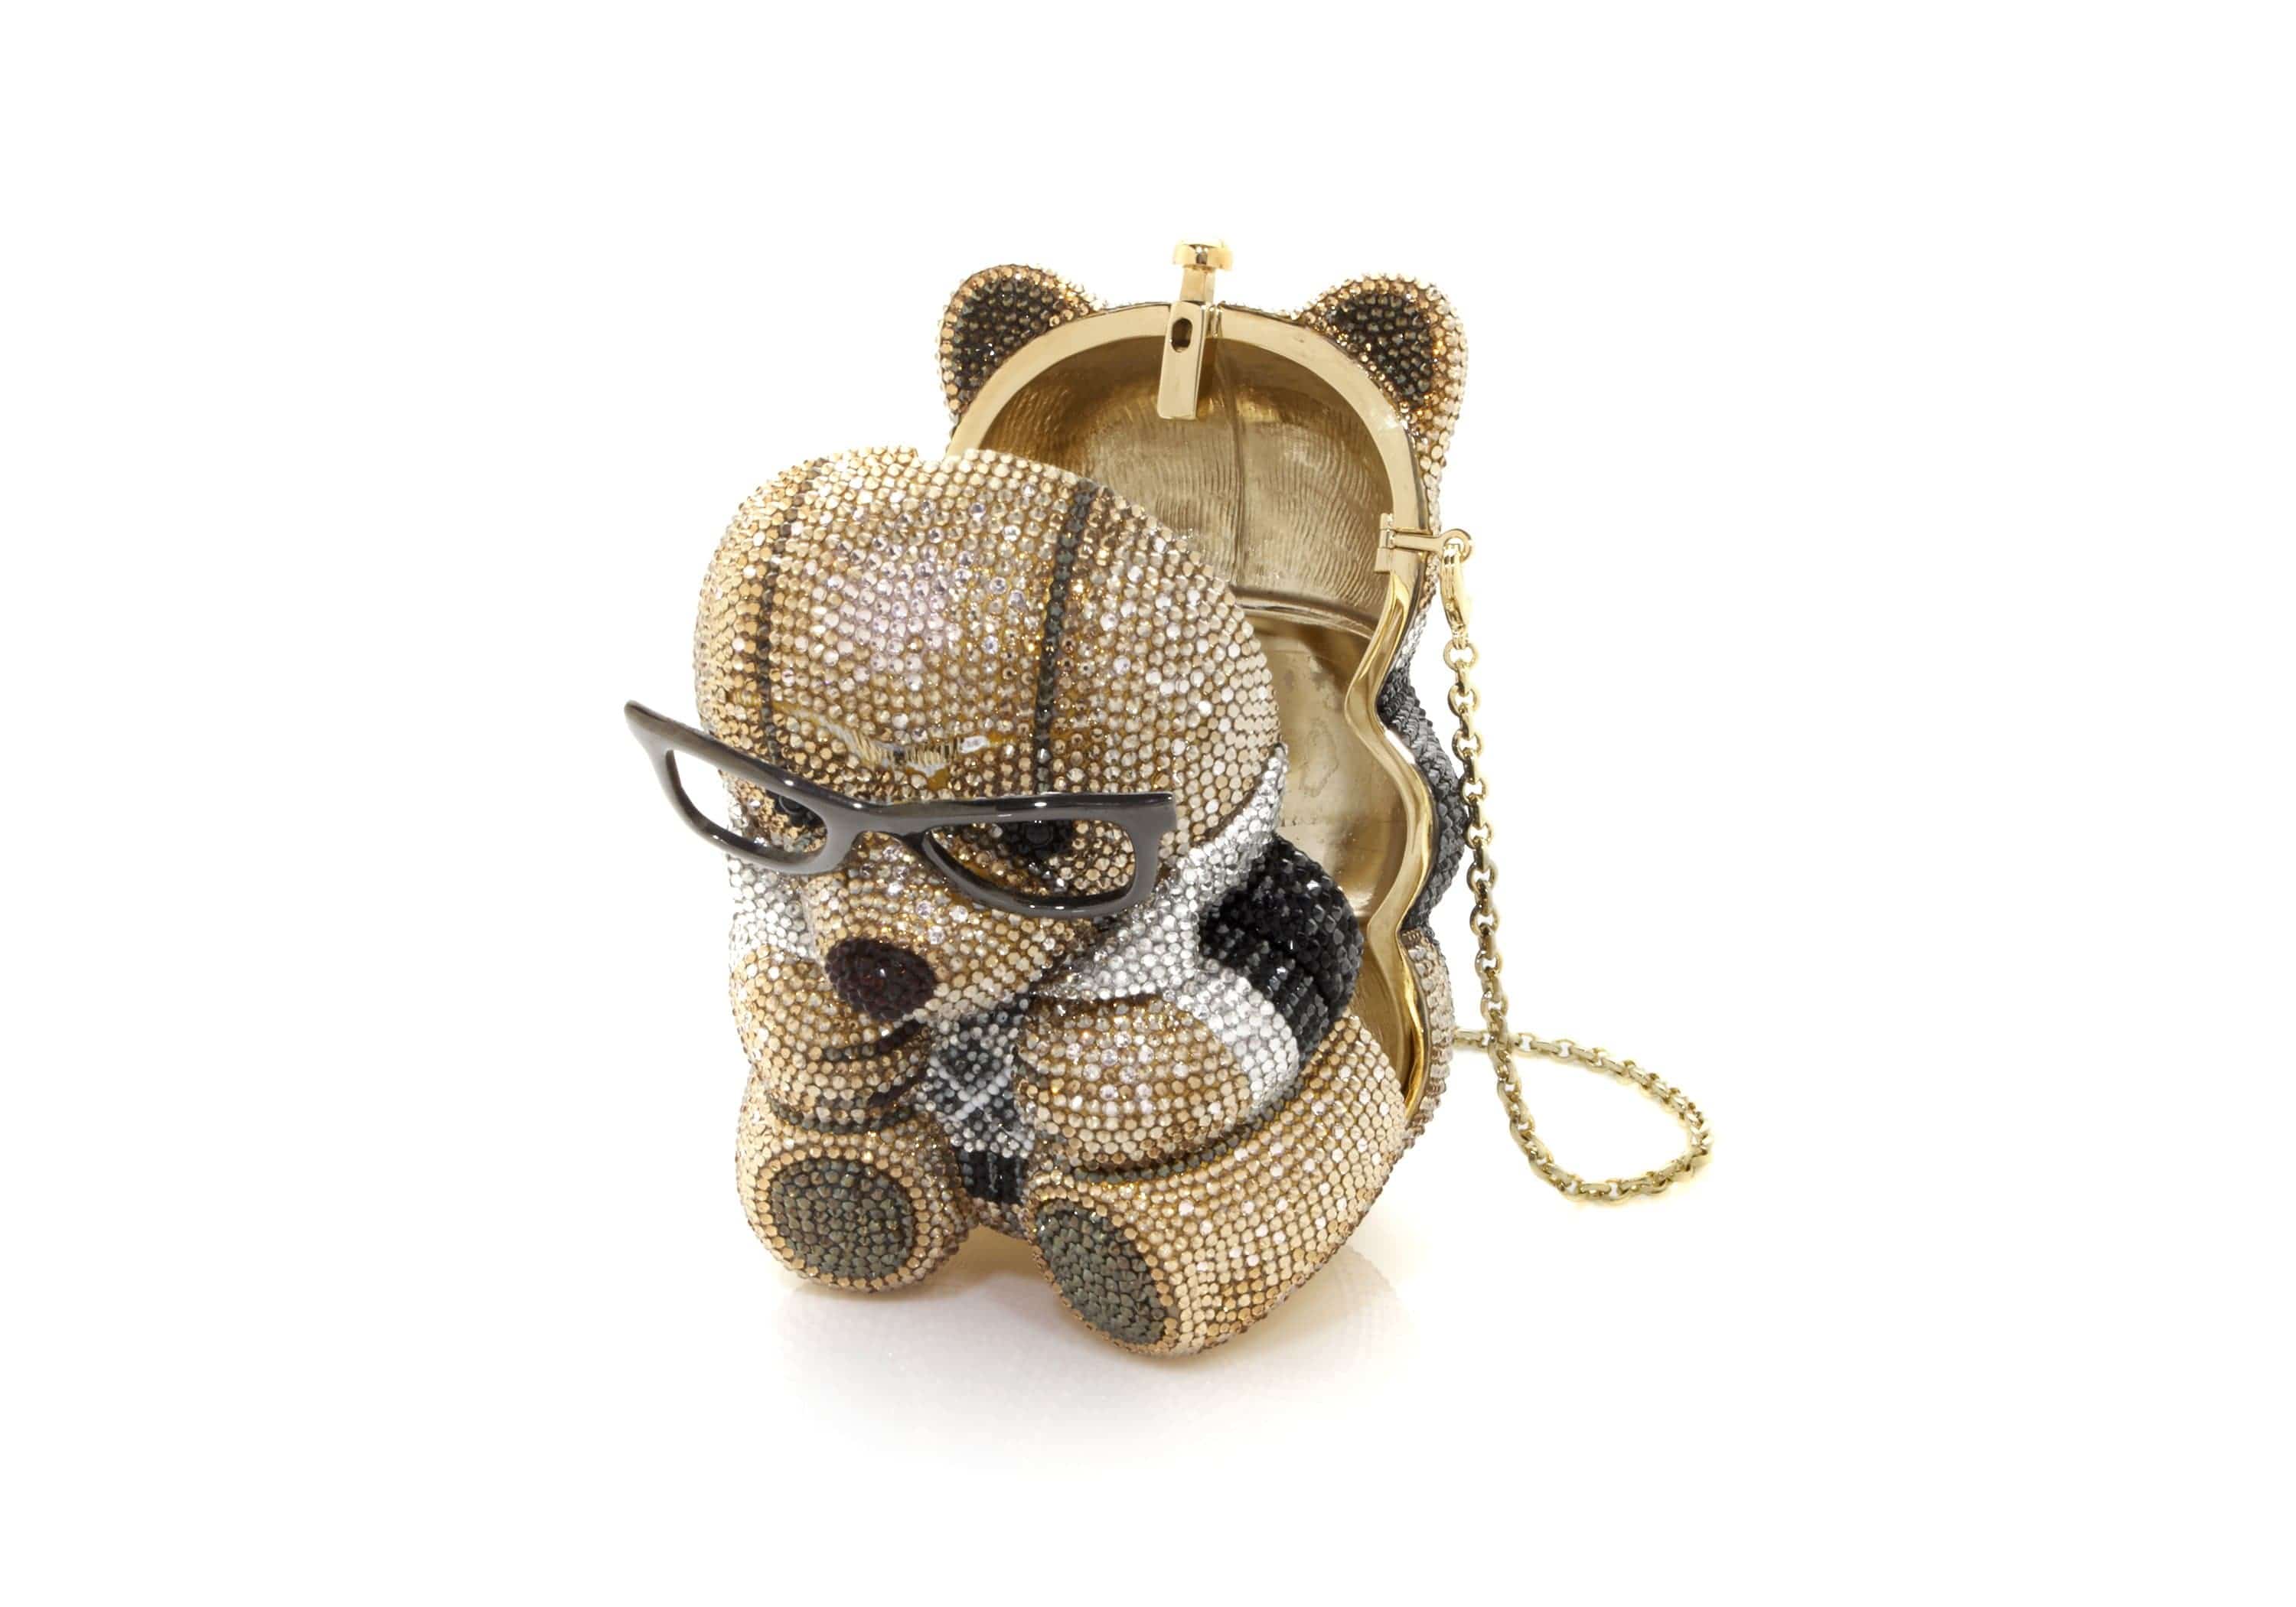 Redefine your elegance with me as I don the Embellished Harrods Bear Clutch  Purse by Judith Leiber. This purse isn't just a fashion…